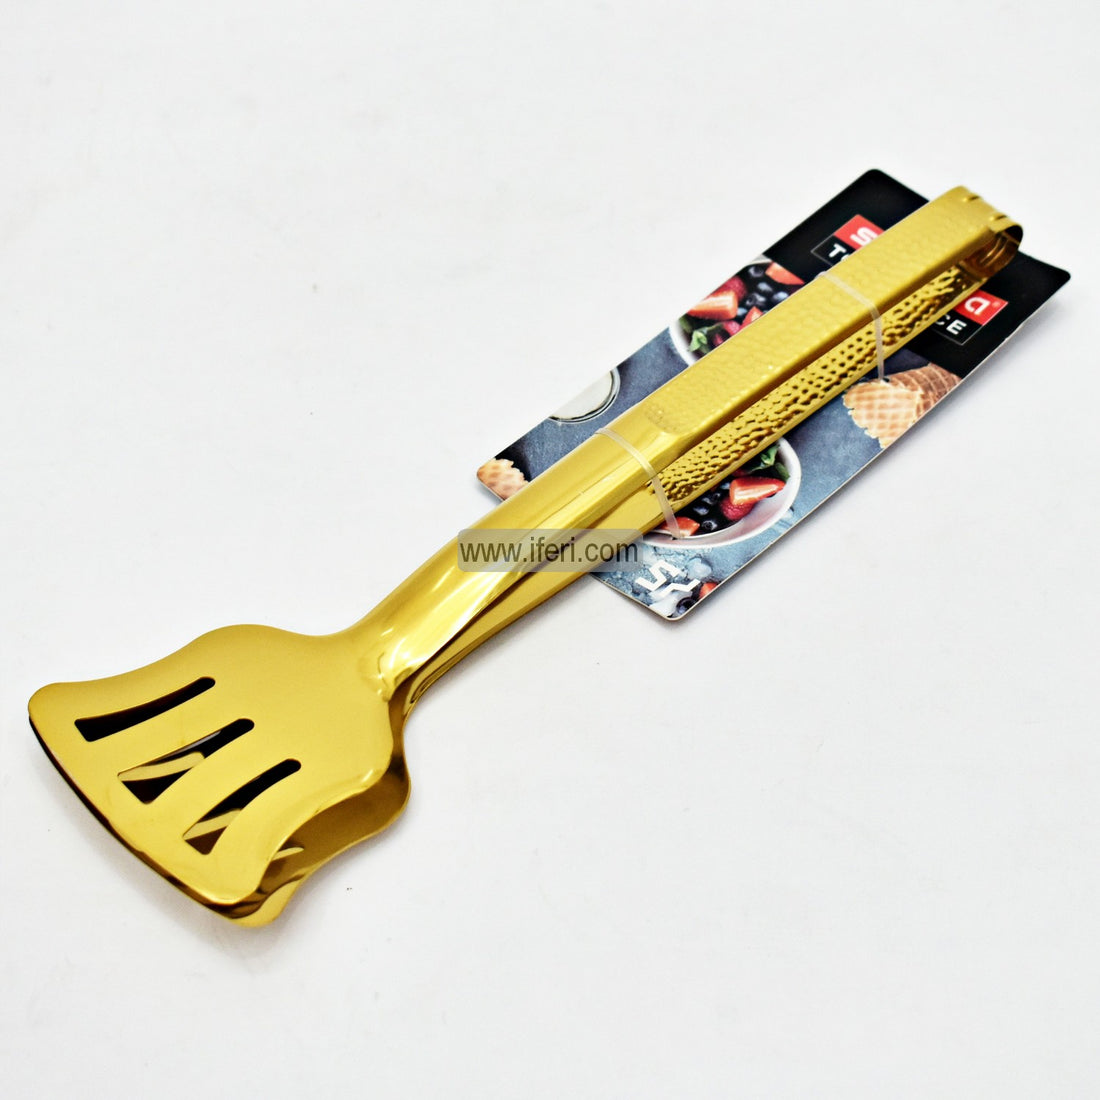 Buy Stainless Steel Cooking / Serving Tong Online from iferi.com in Bangladesh